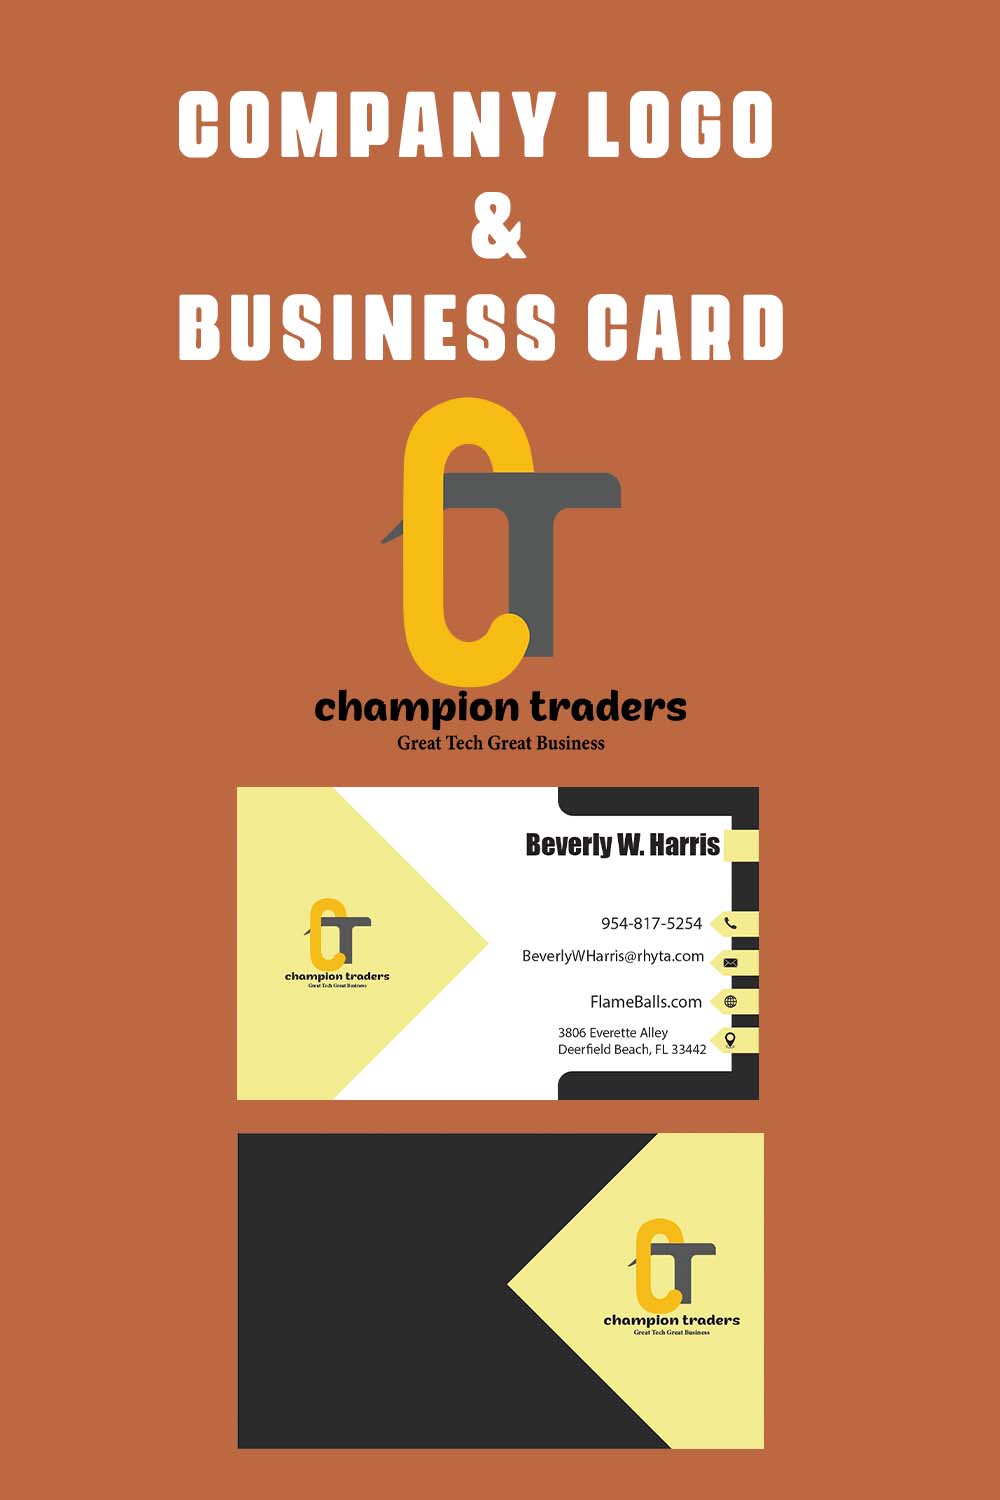 Company Logo and a Business Card pinterest image.